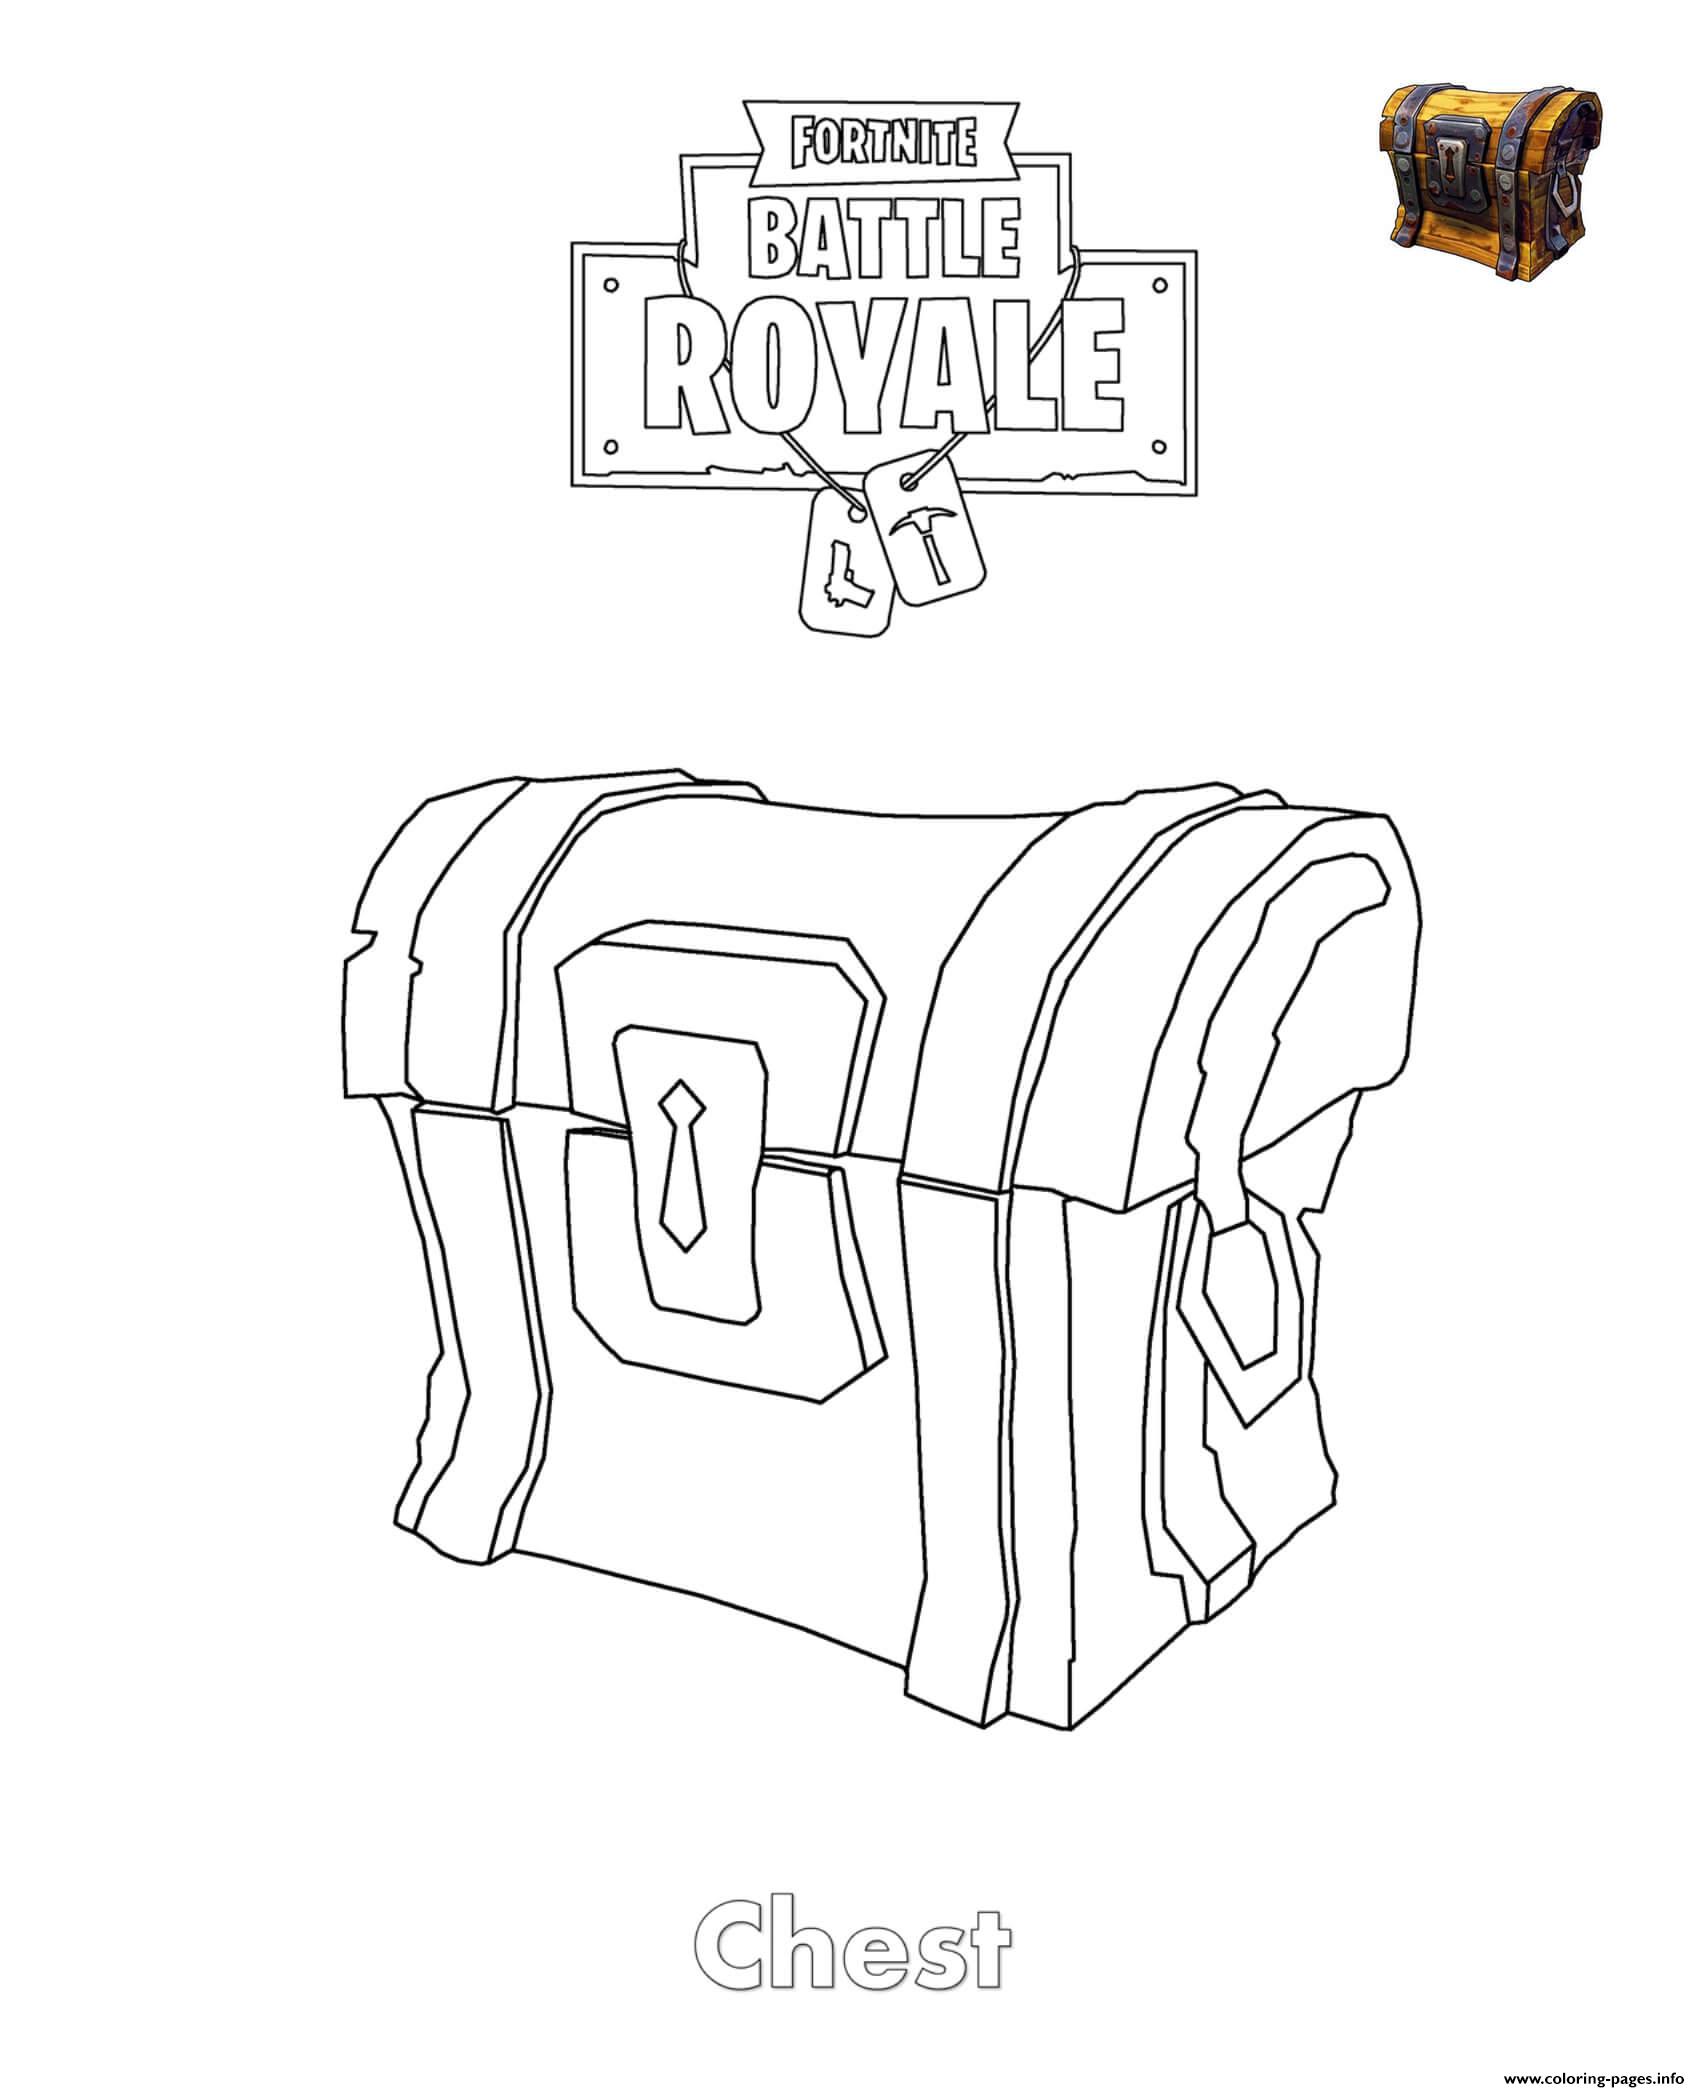 Chest Fortnite coloring